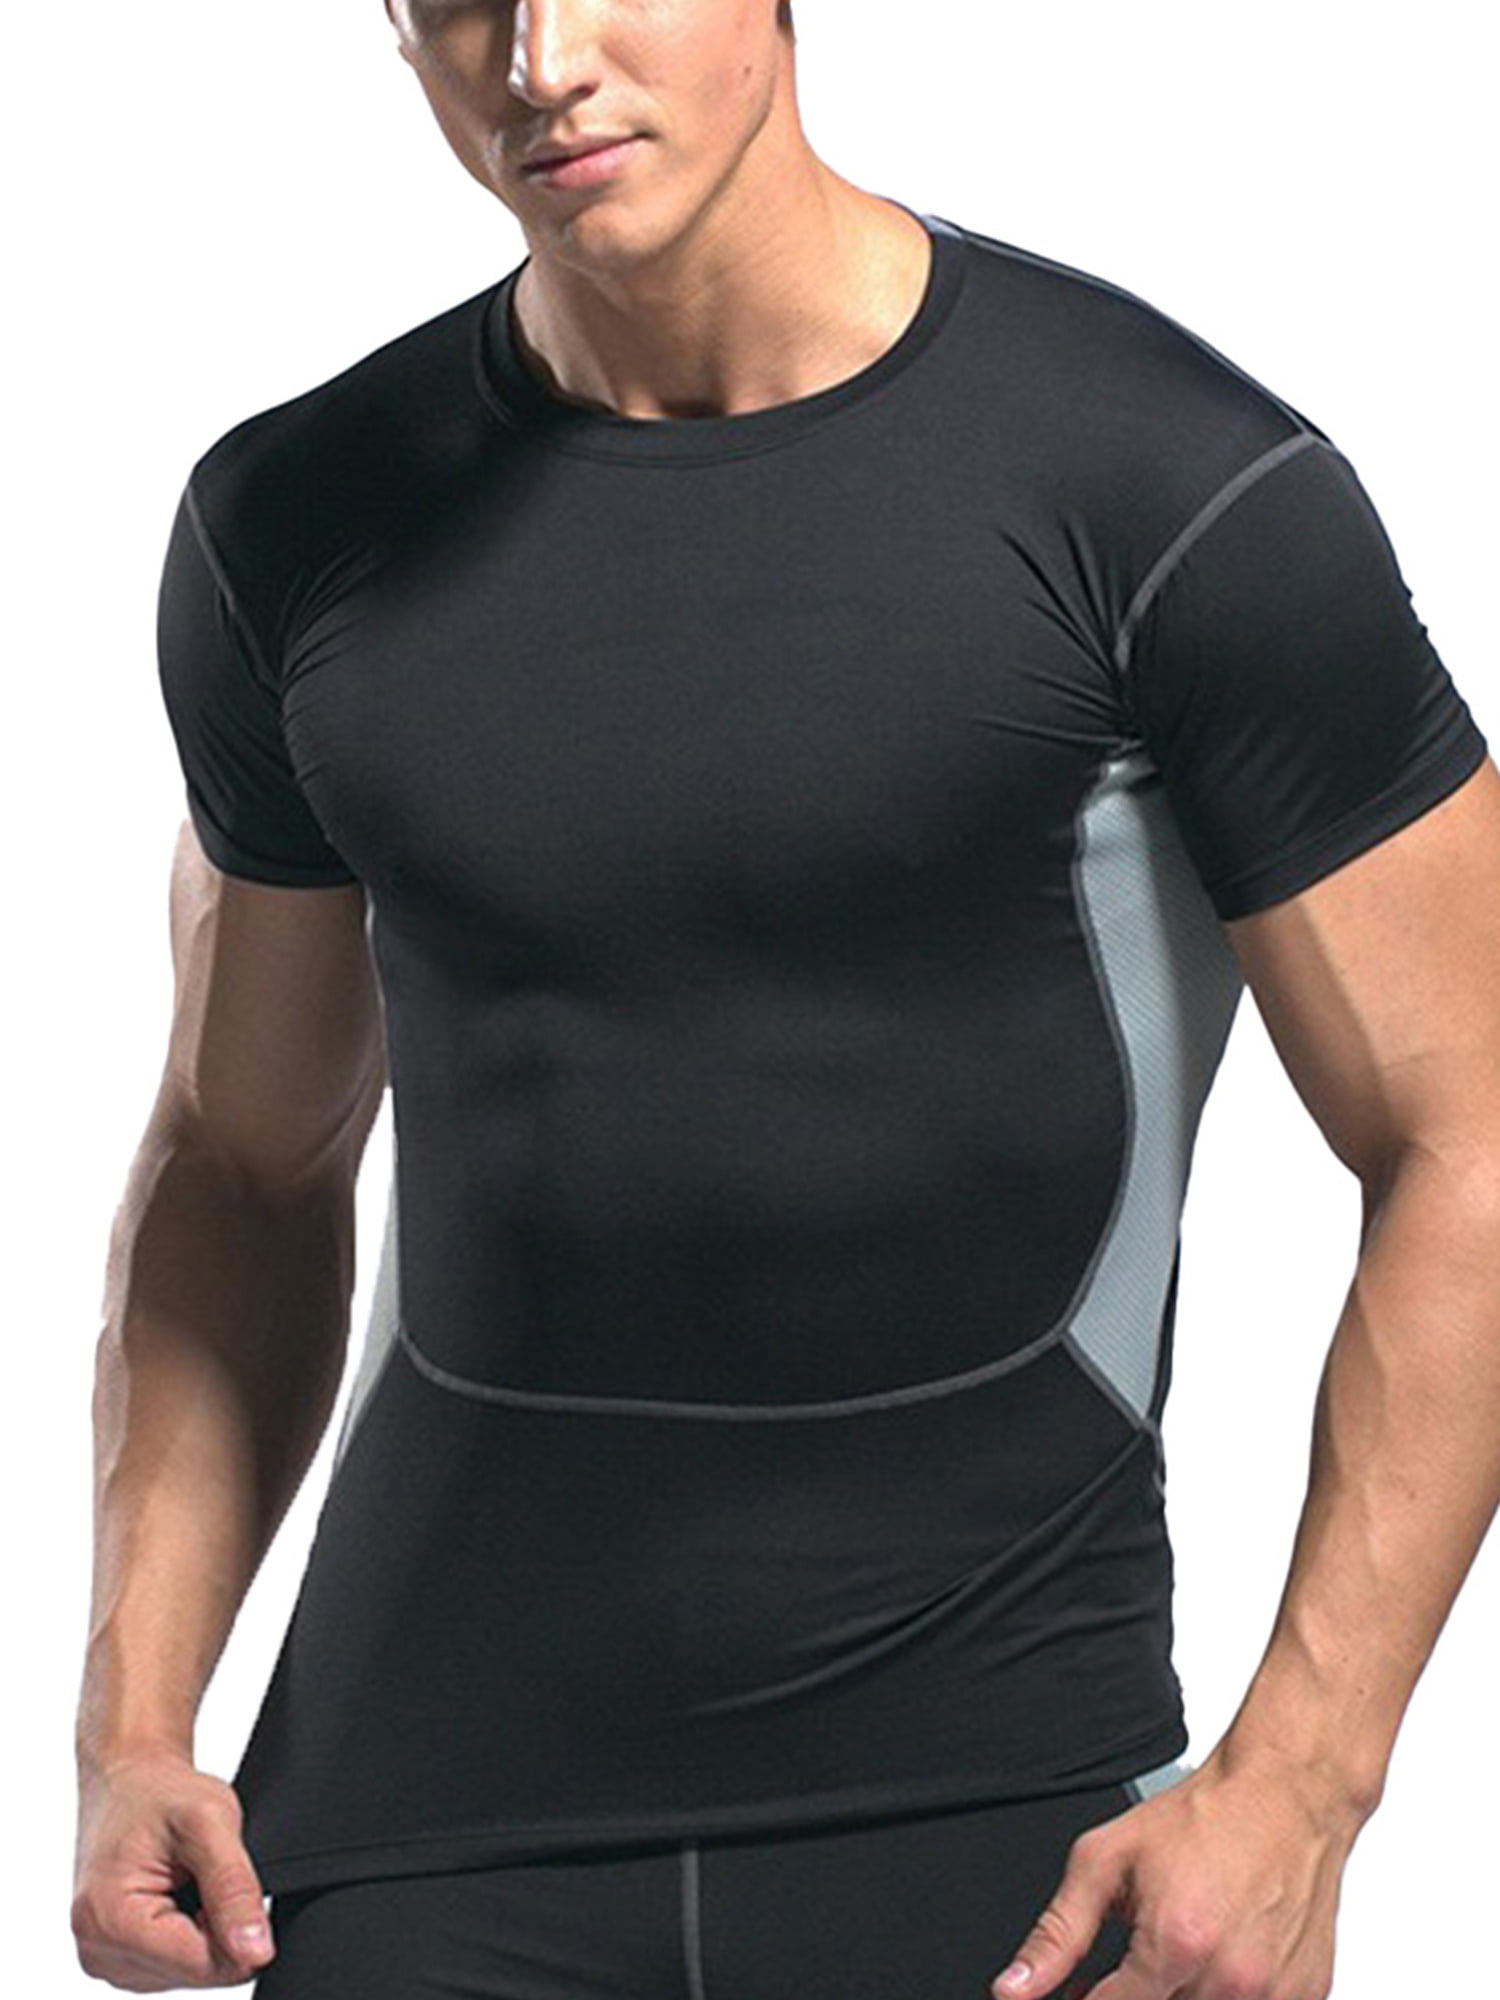 Men's Athletic Compression  Base Layer Sports T-Shirt Black Slimming Tight fit 